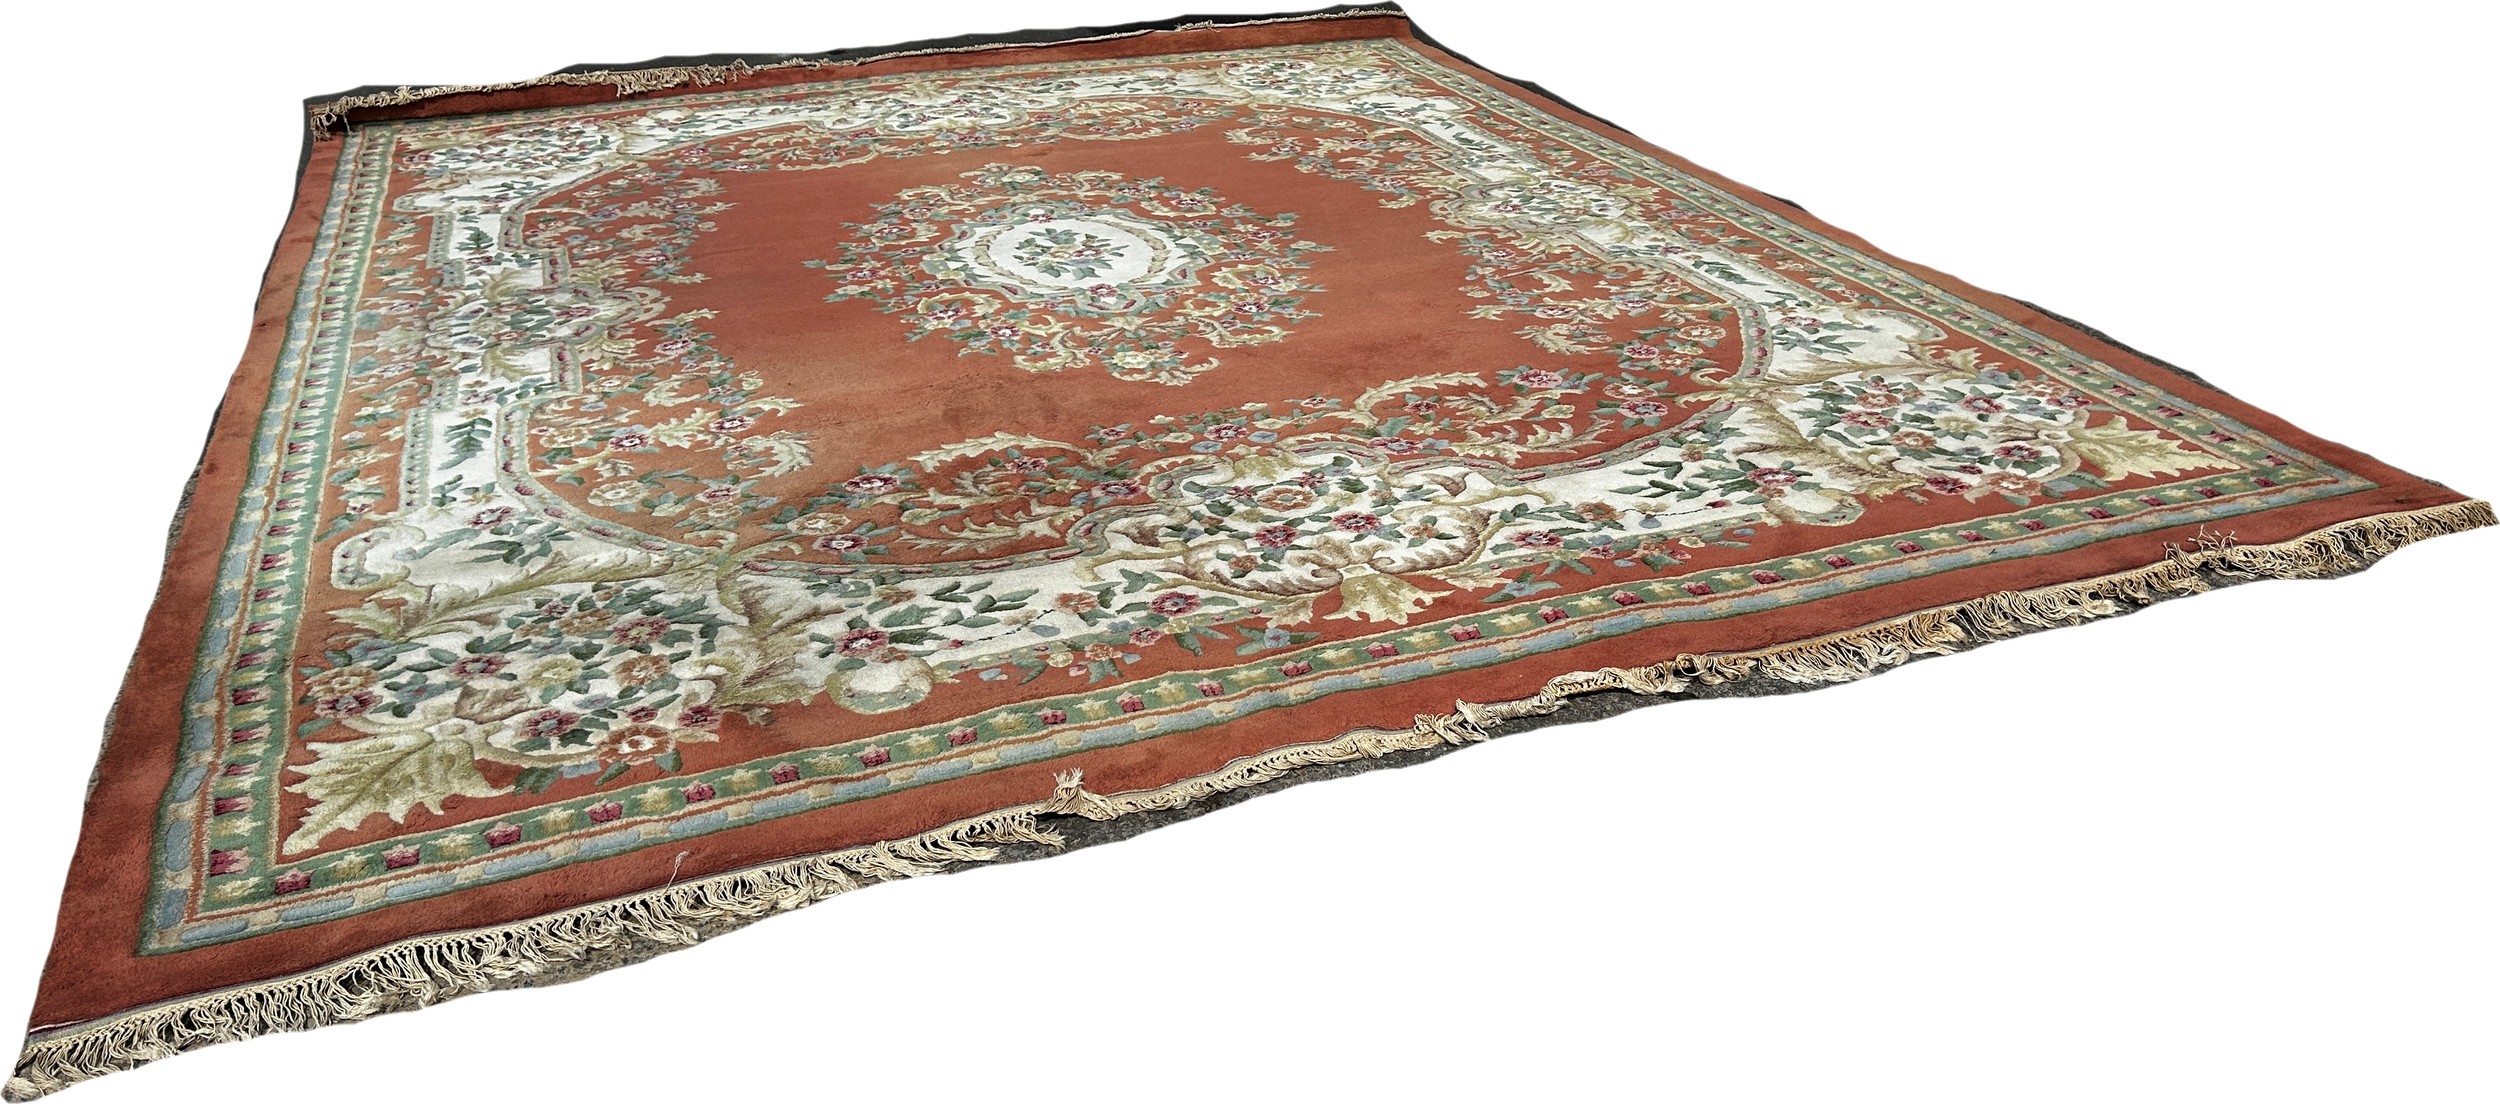 A large country house Aubusson style thick wool pile carpet with a floral medallion on an apricot